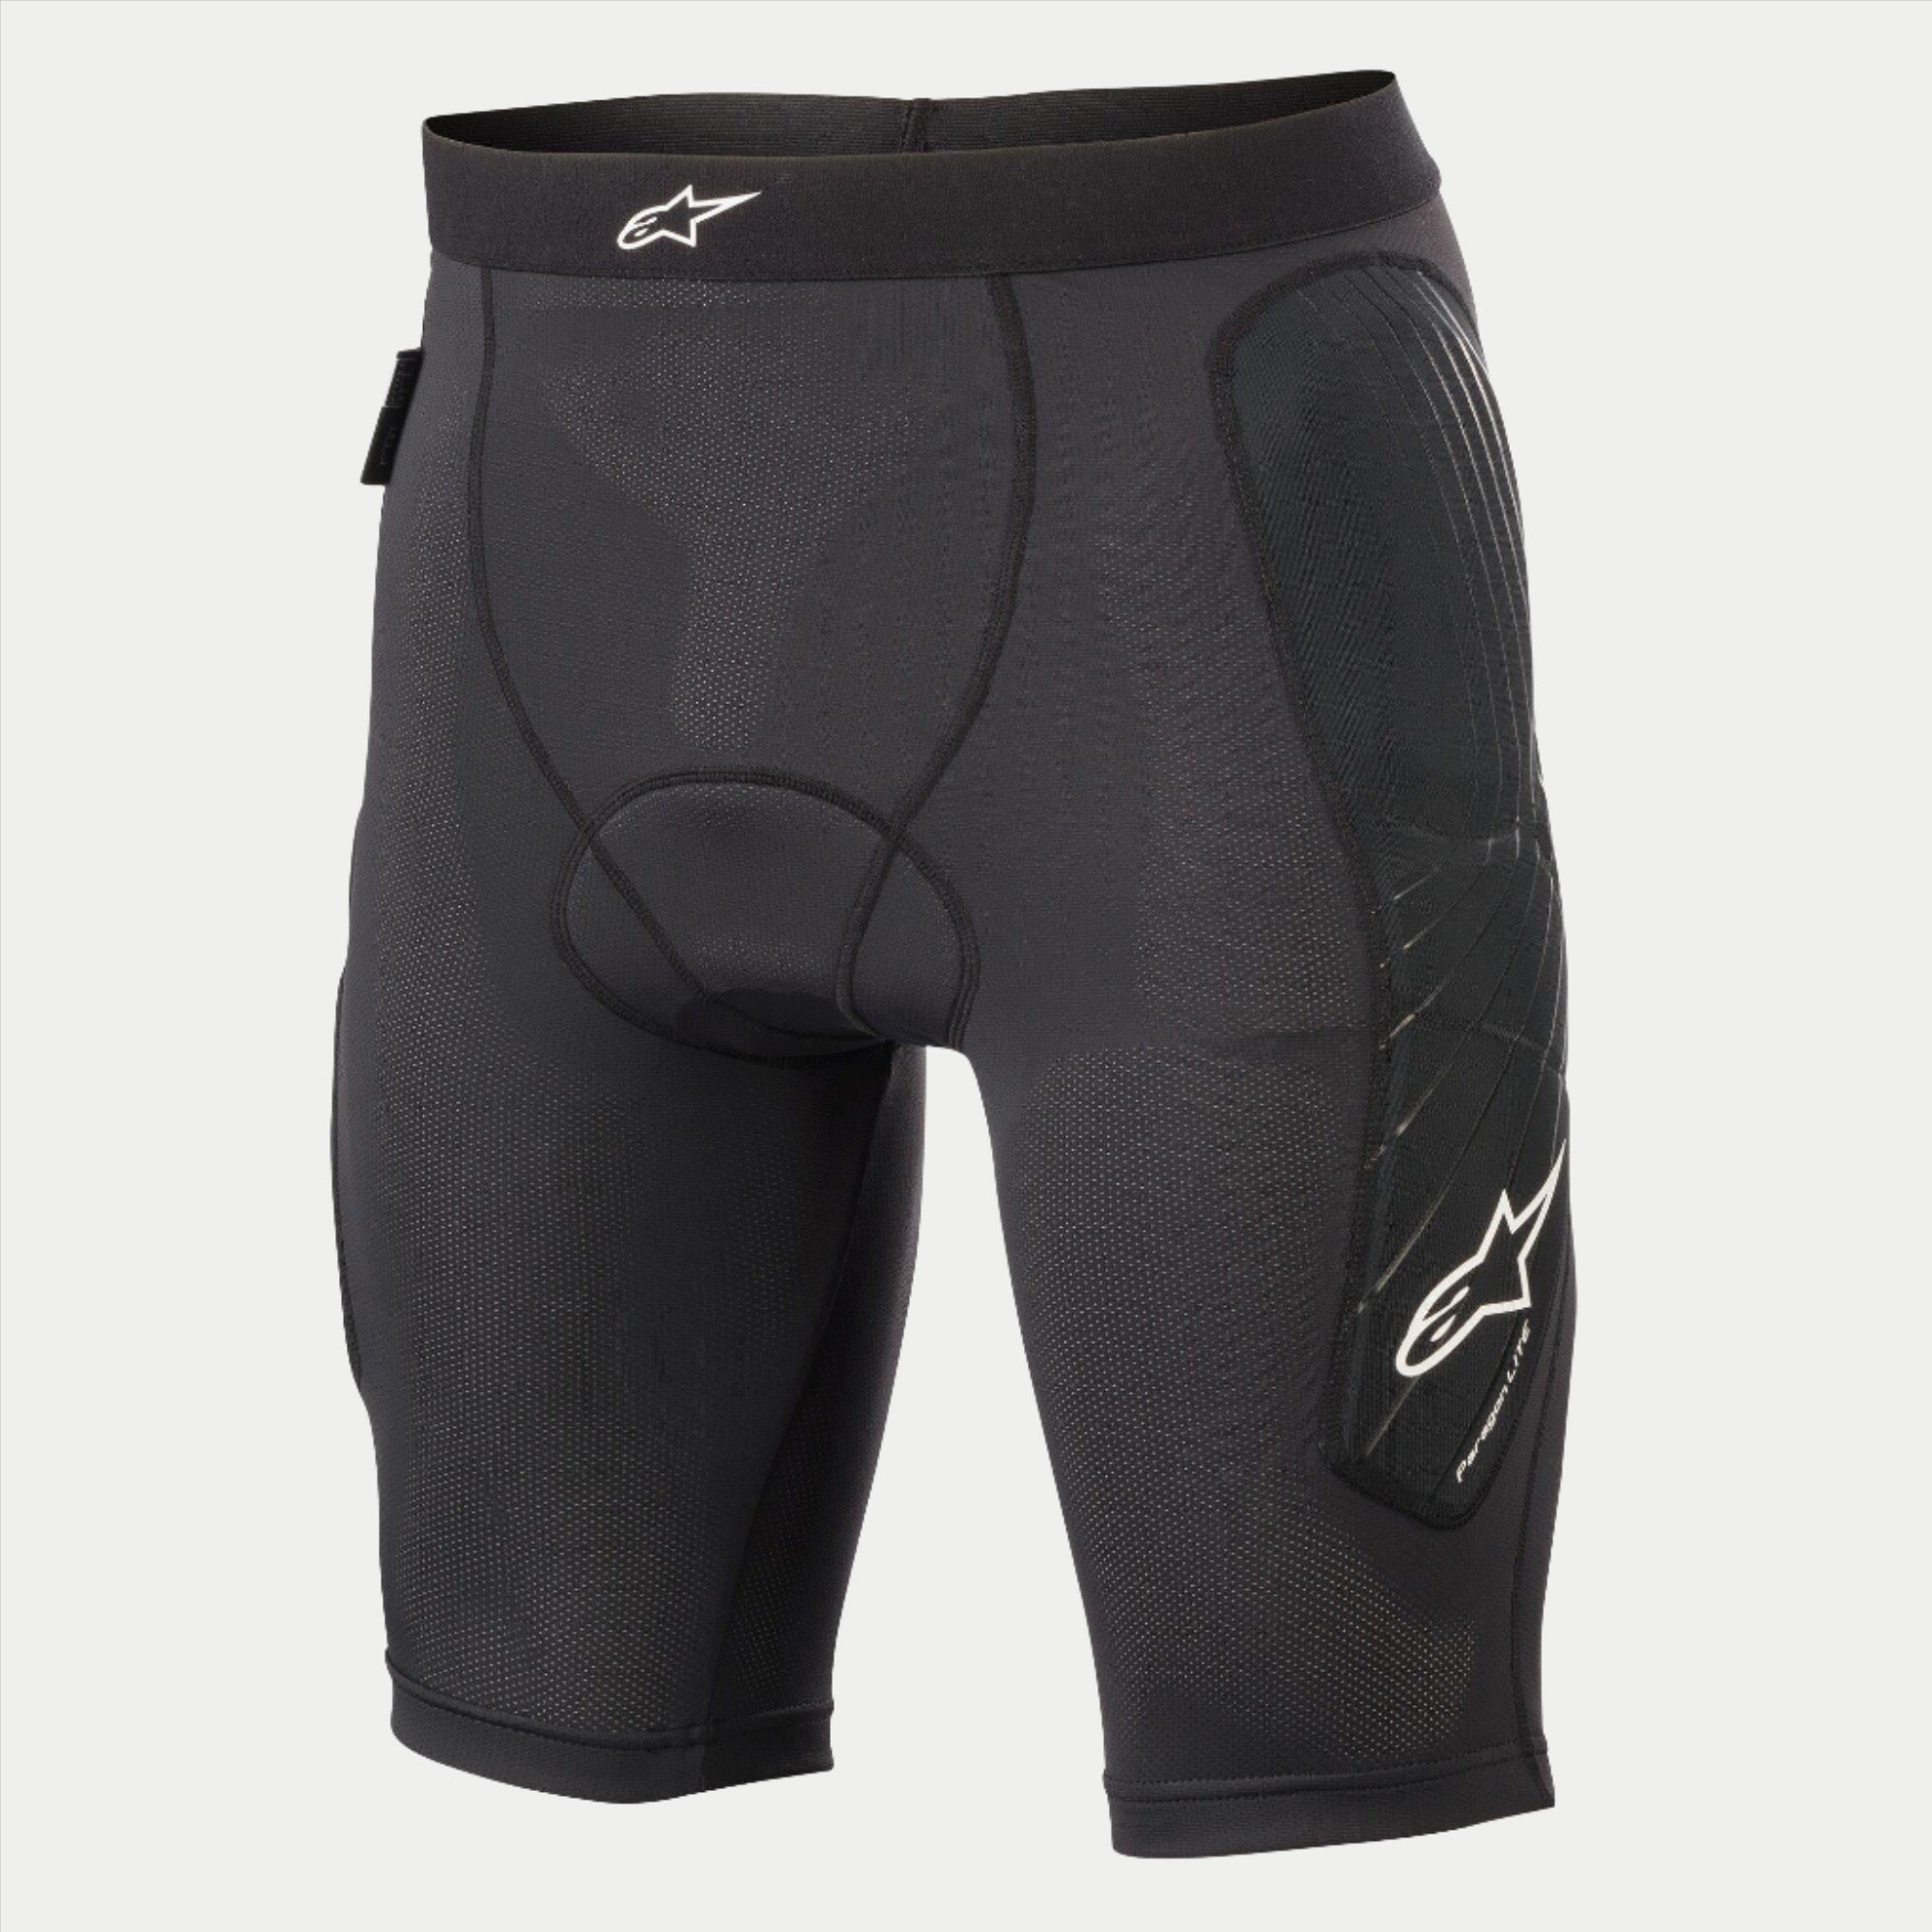 Paragon Lite Youth  Protection Short